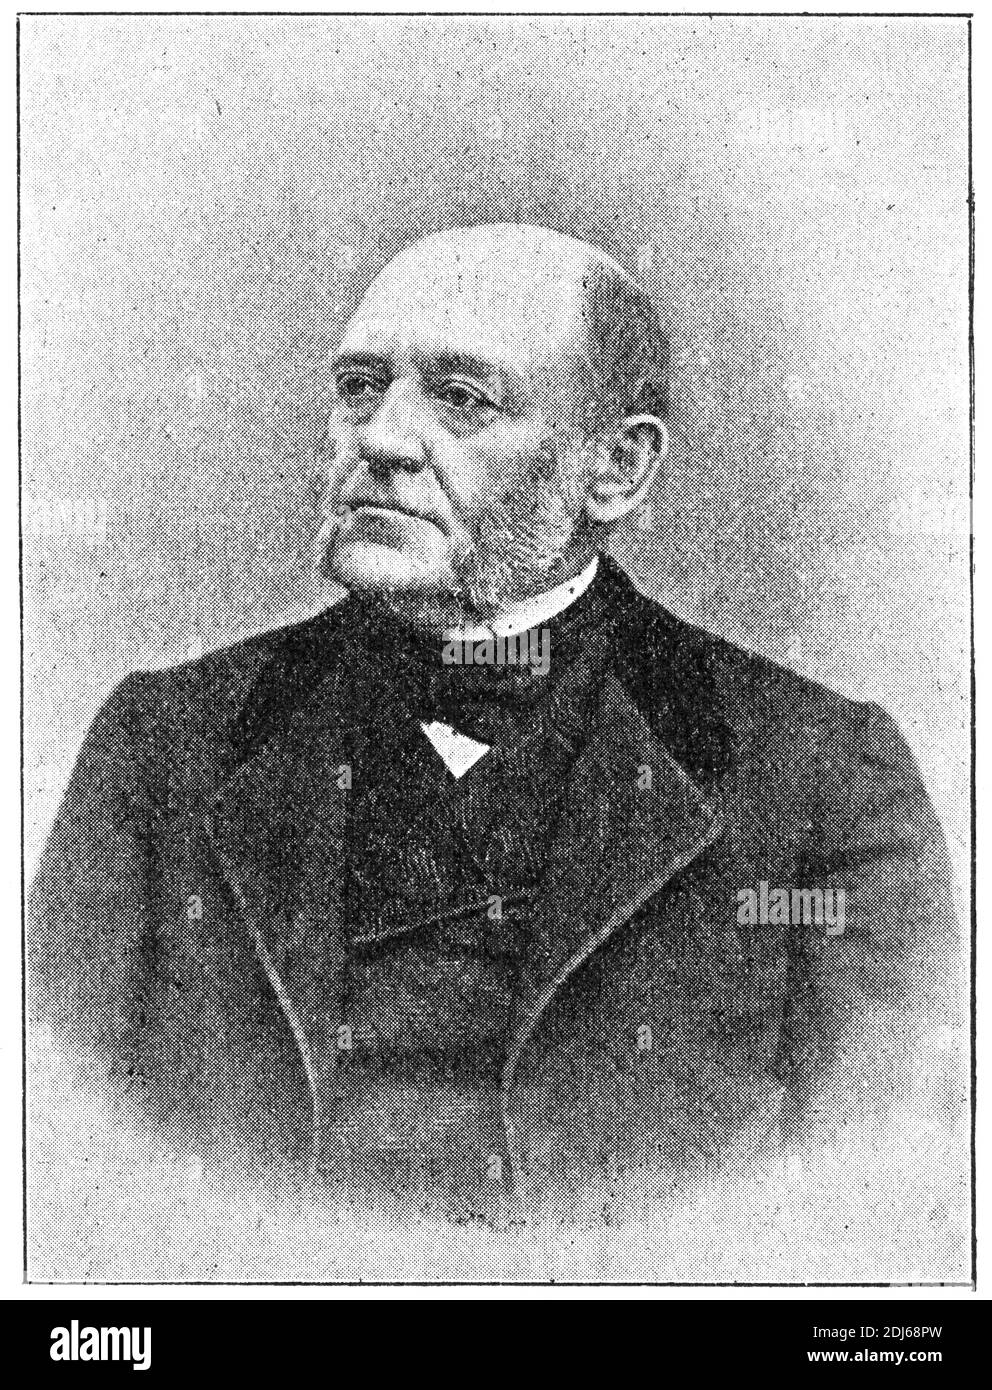 Portrait of Baron Carl von Rokitansky - a Bohemian physician, pathologist, humanist philosopher and liberal politician. Illustration of the 19th century. Germany. White background. Stock Photo